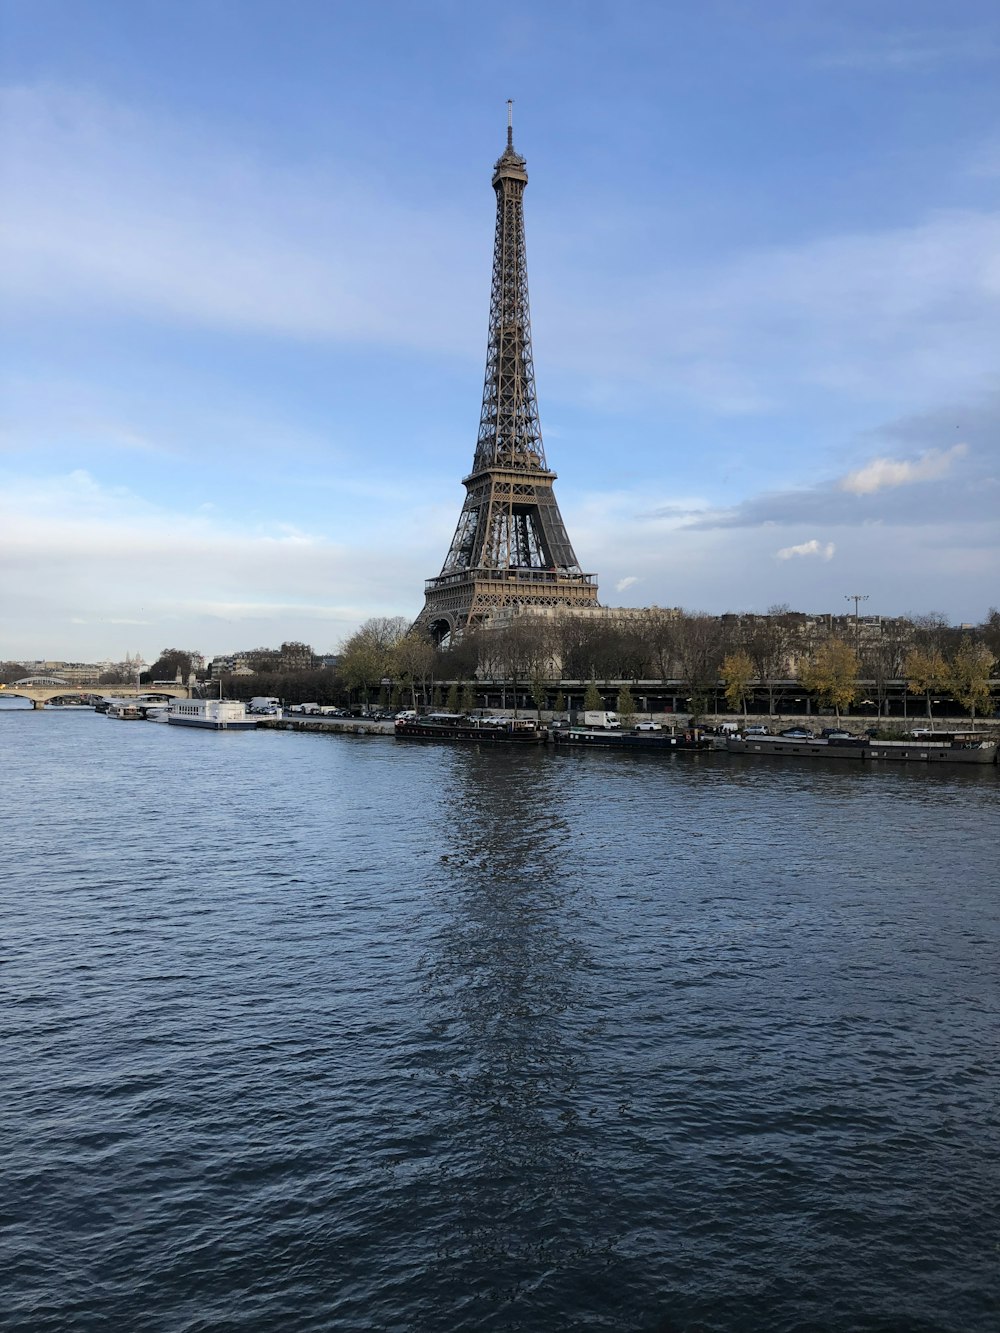 a view of the eiffel tower from across the river